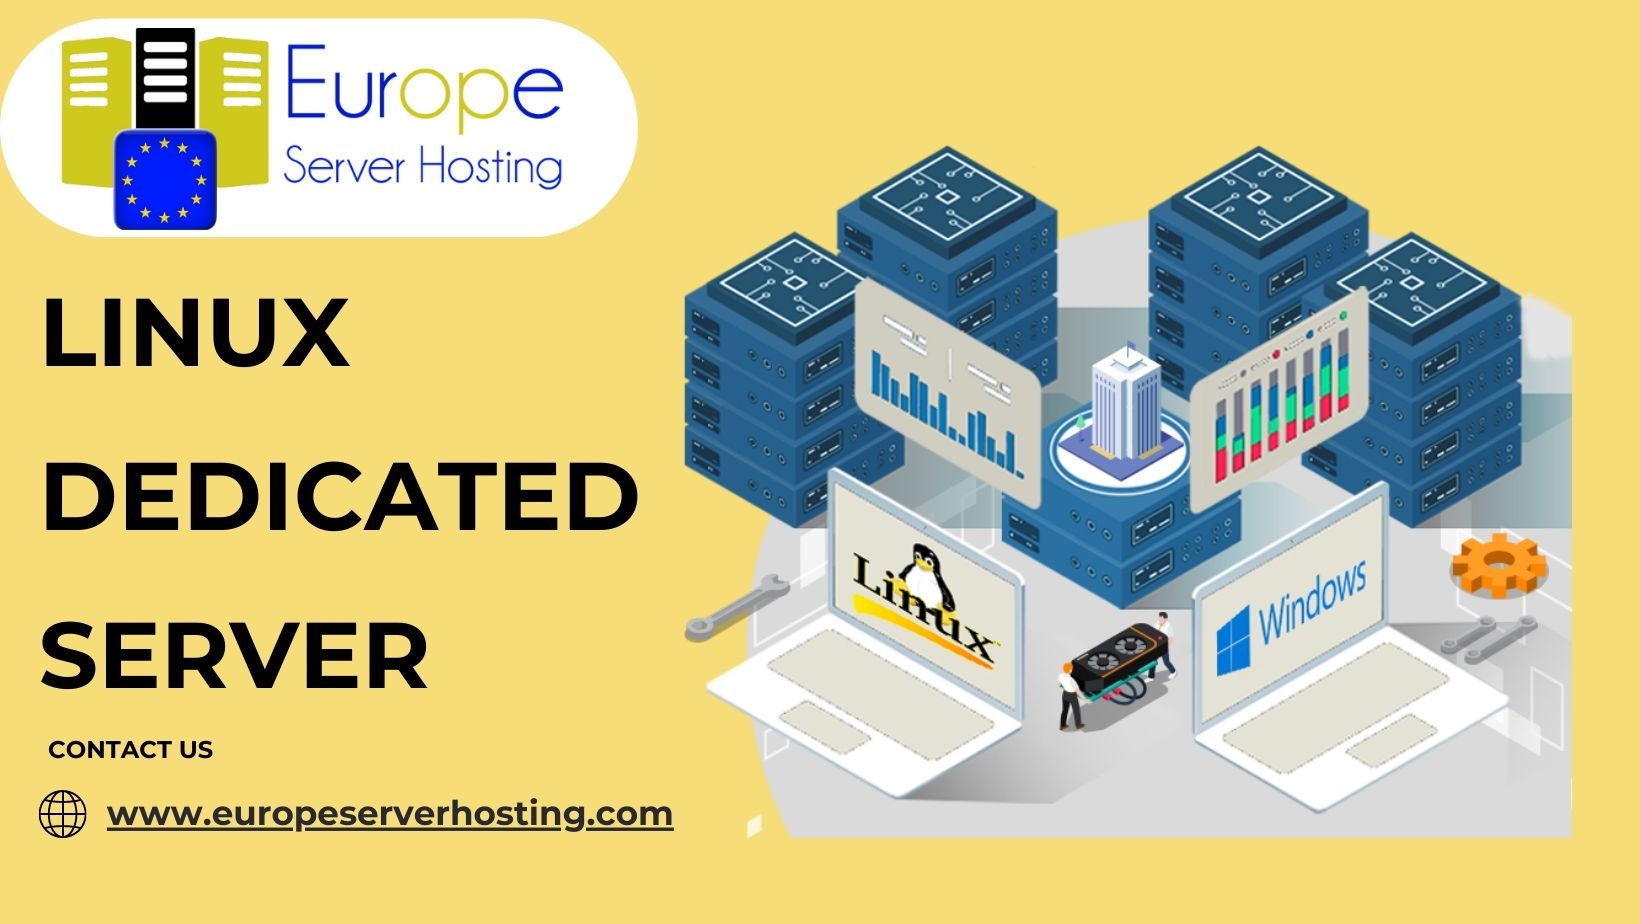 Linux dedicated server hosting involves the provision of an entire physical server for a single client, providing unparalleled control and resources.